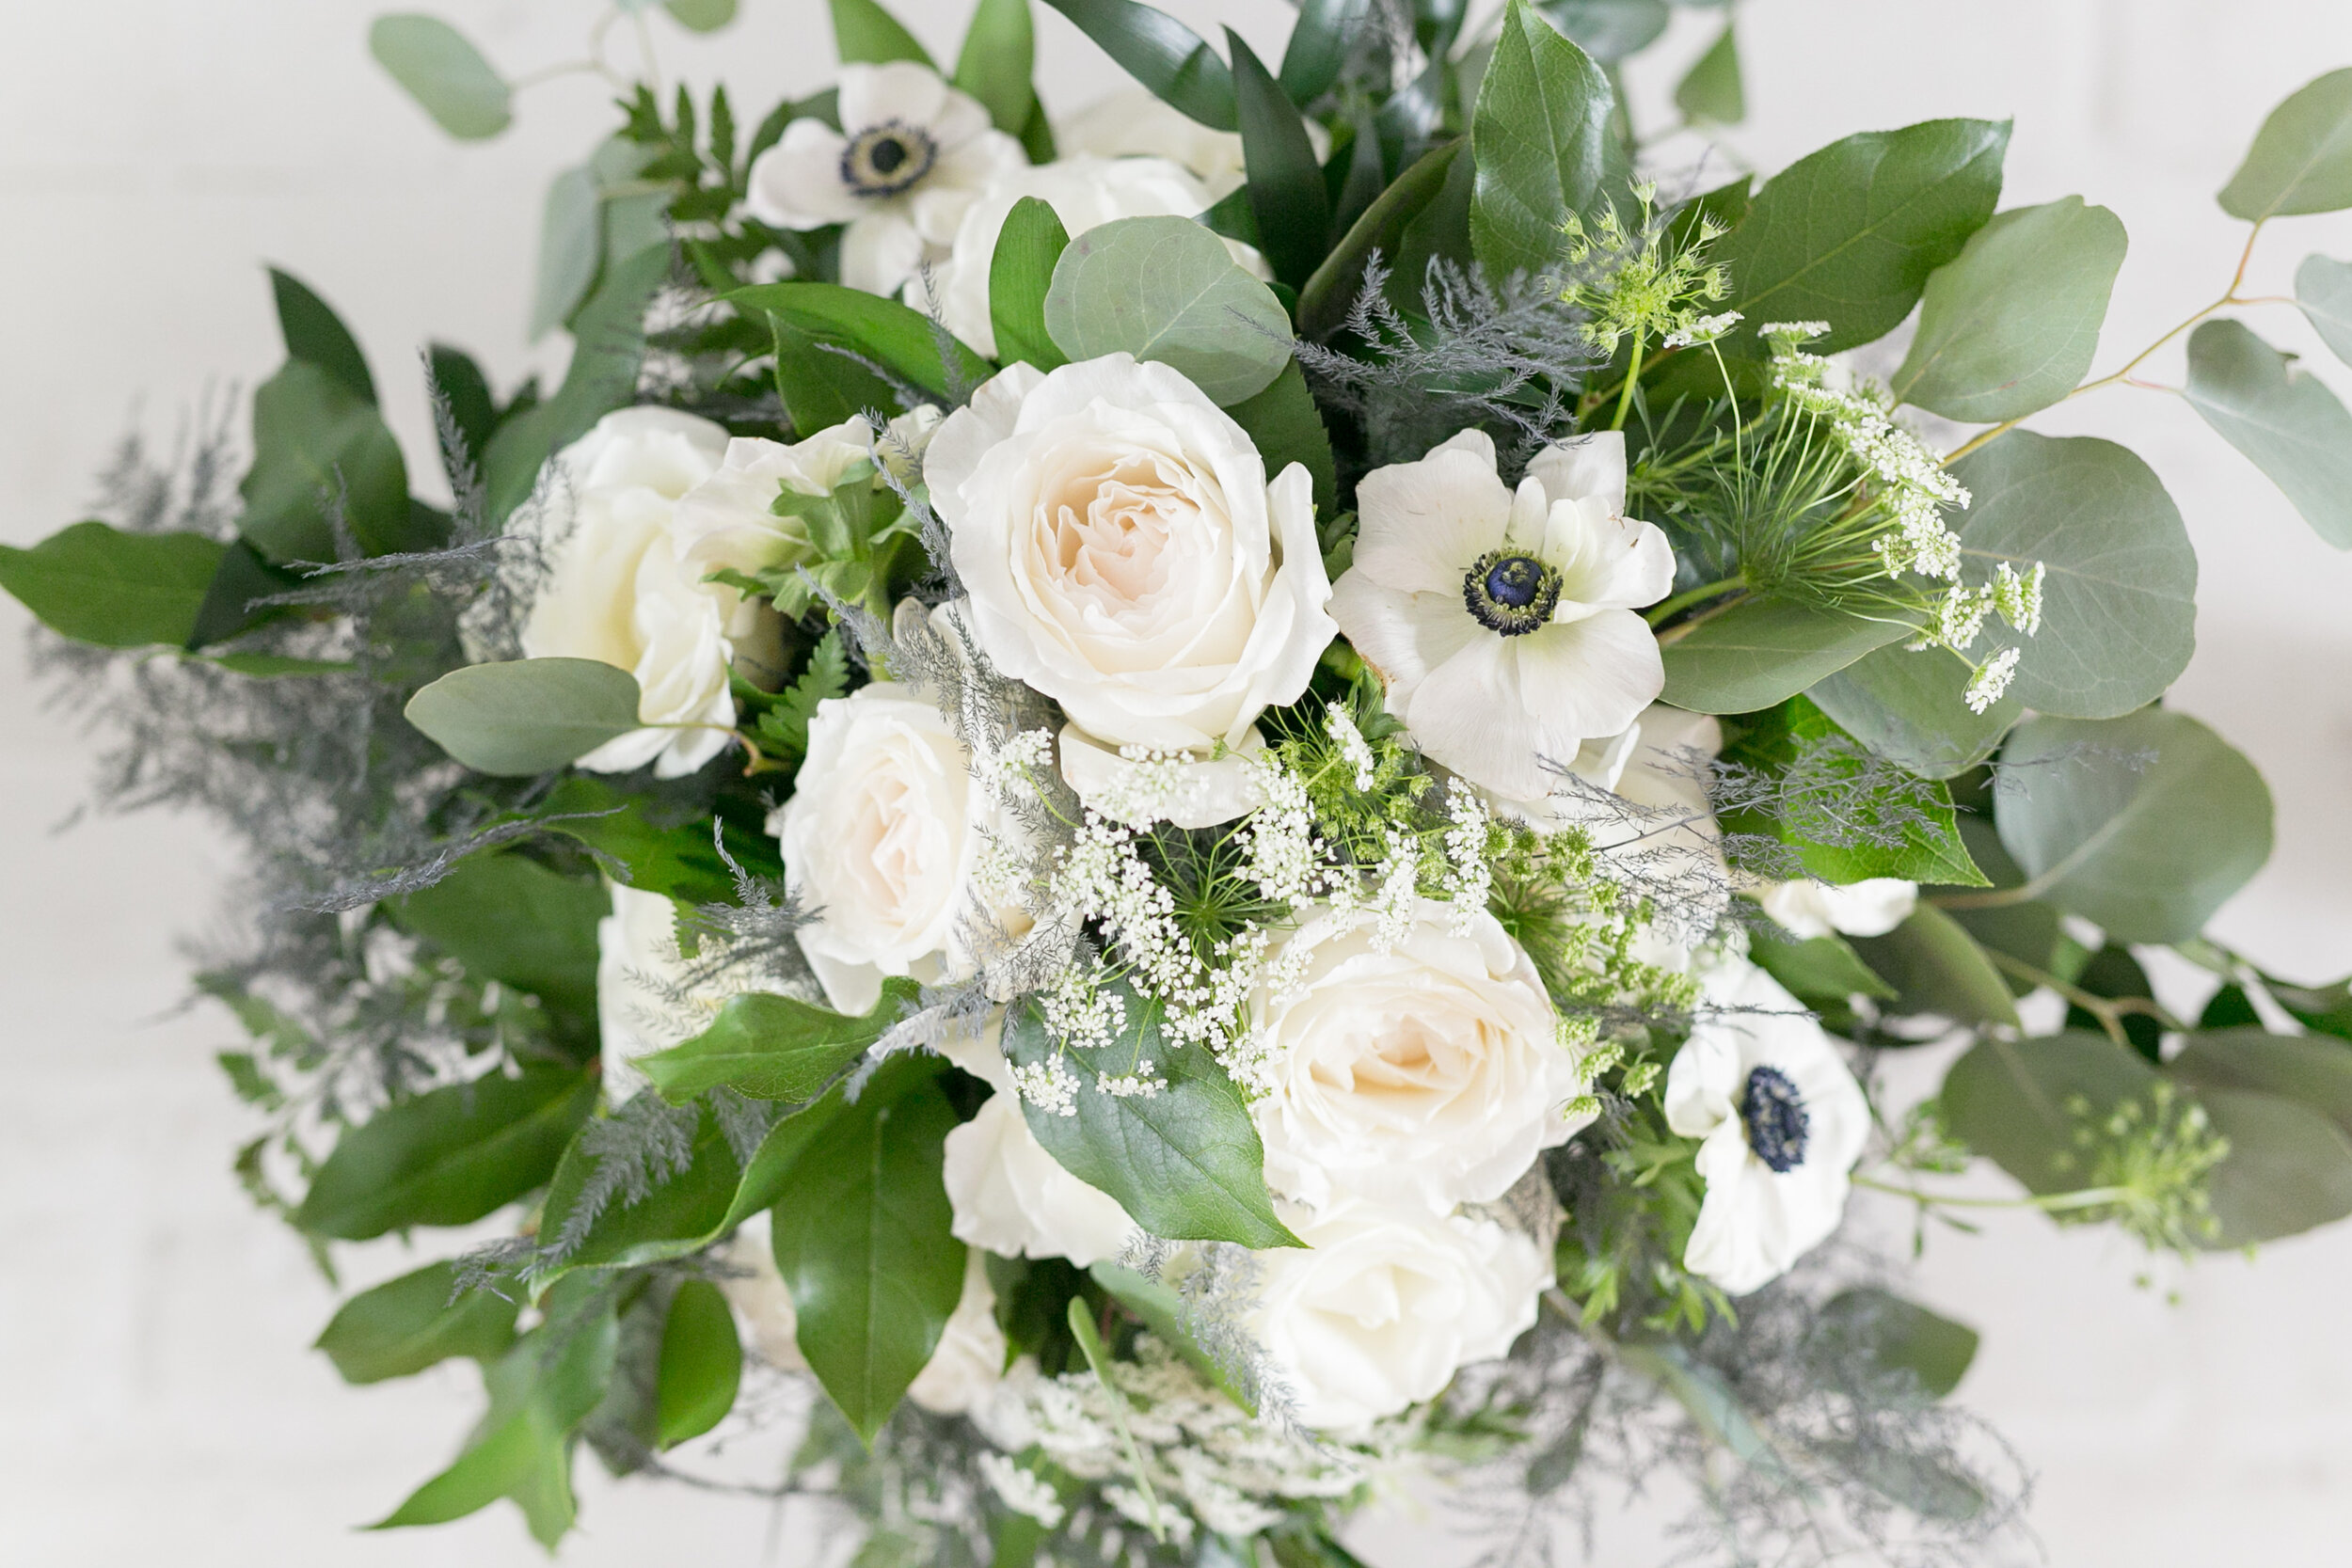 Bluegrass Chic - Black and White Wedding Bridal Bouquets with Anemones